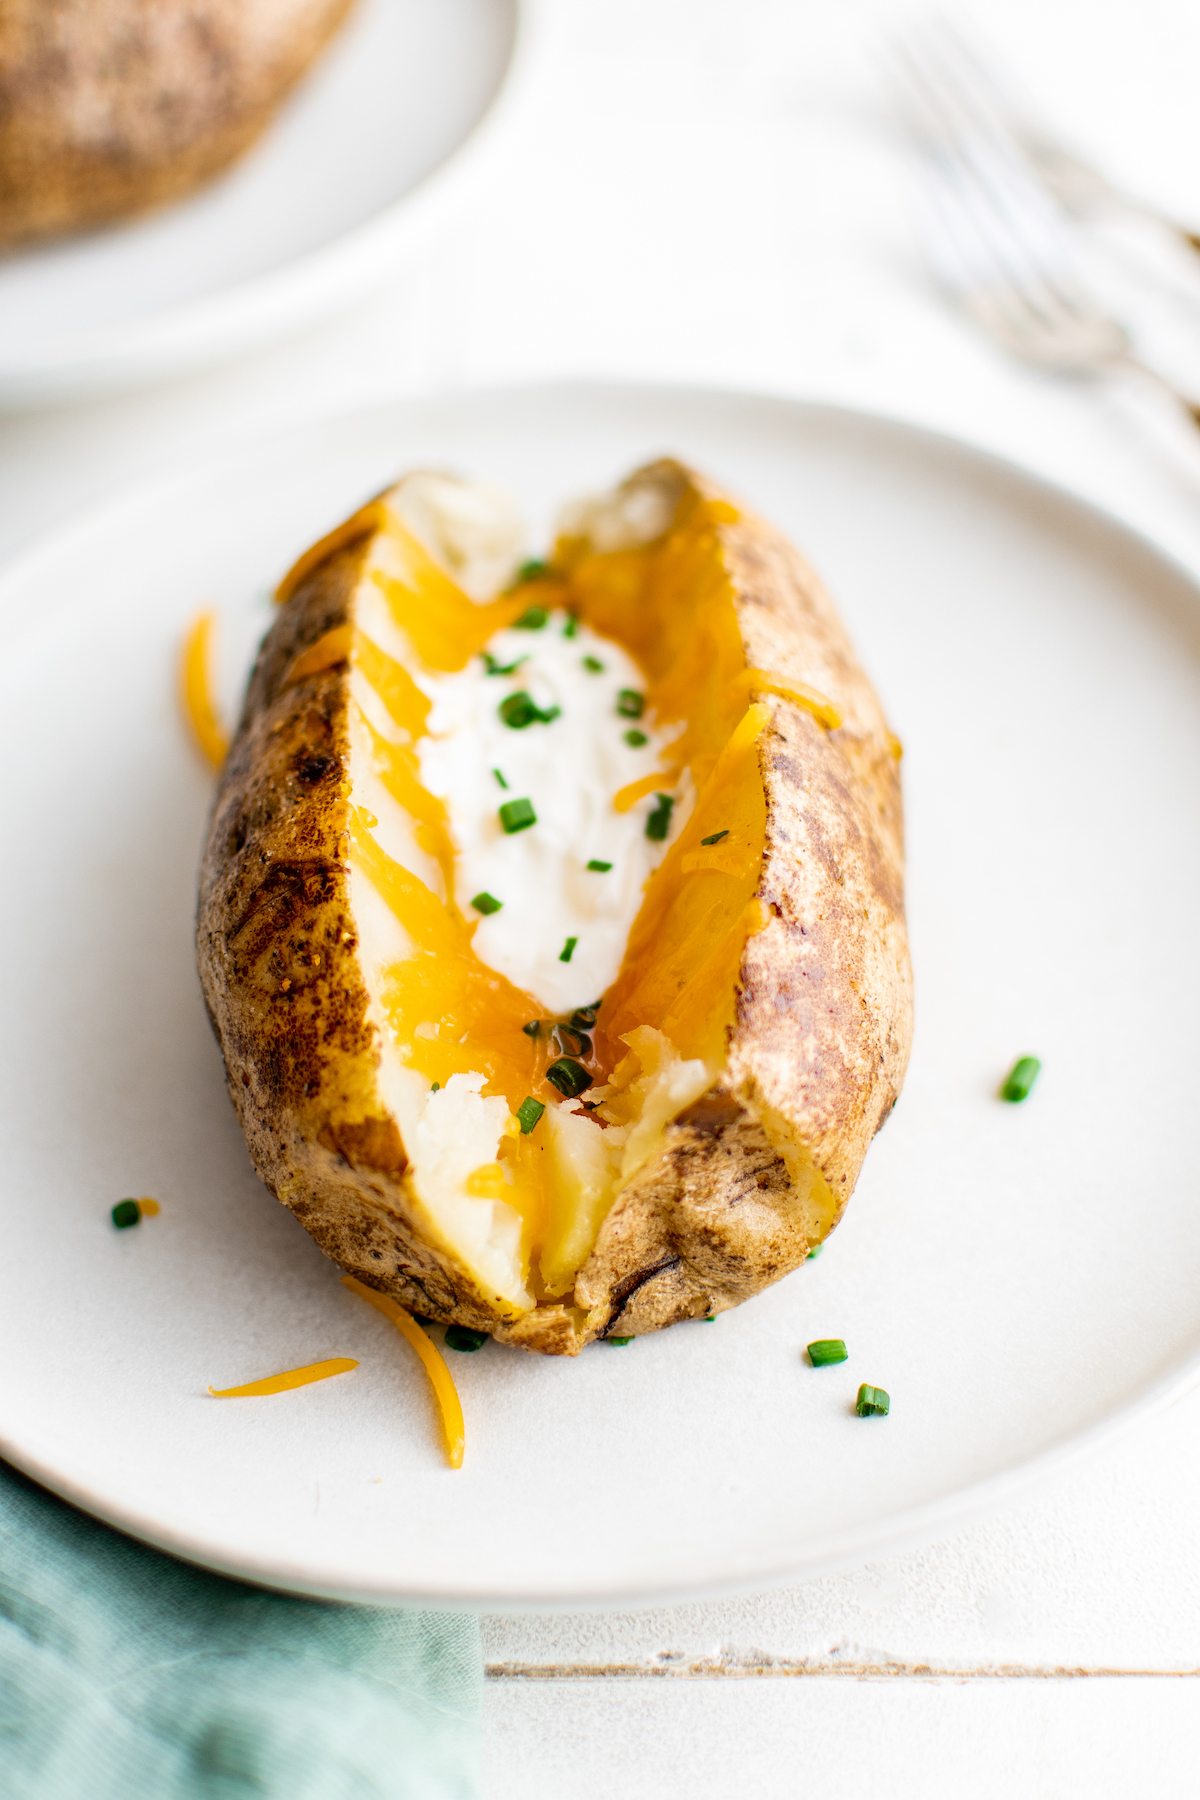 A roasted potato with melted cheese, sour cream, and chives.